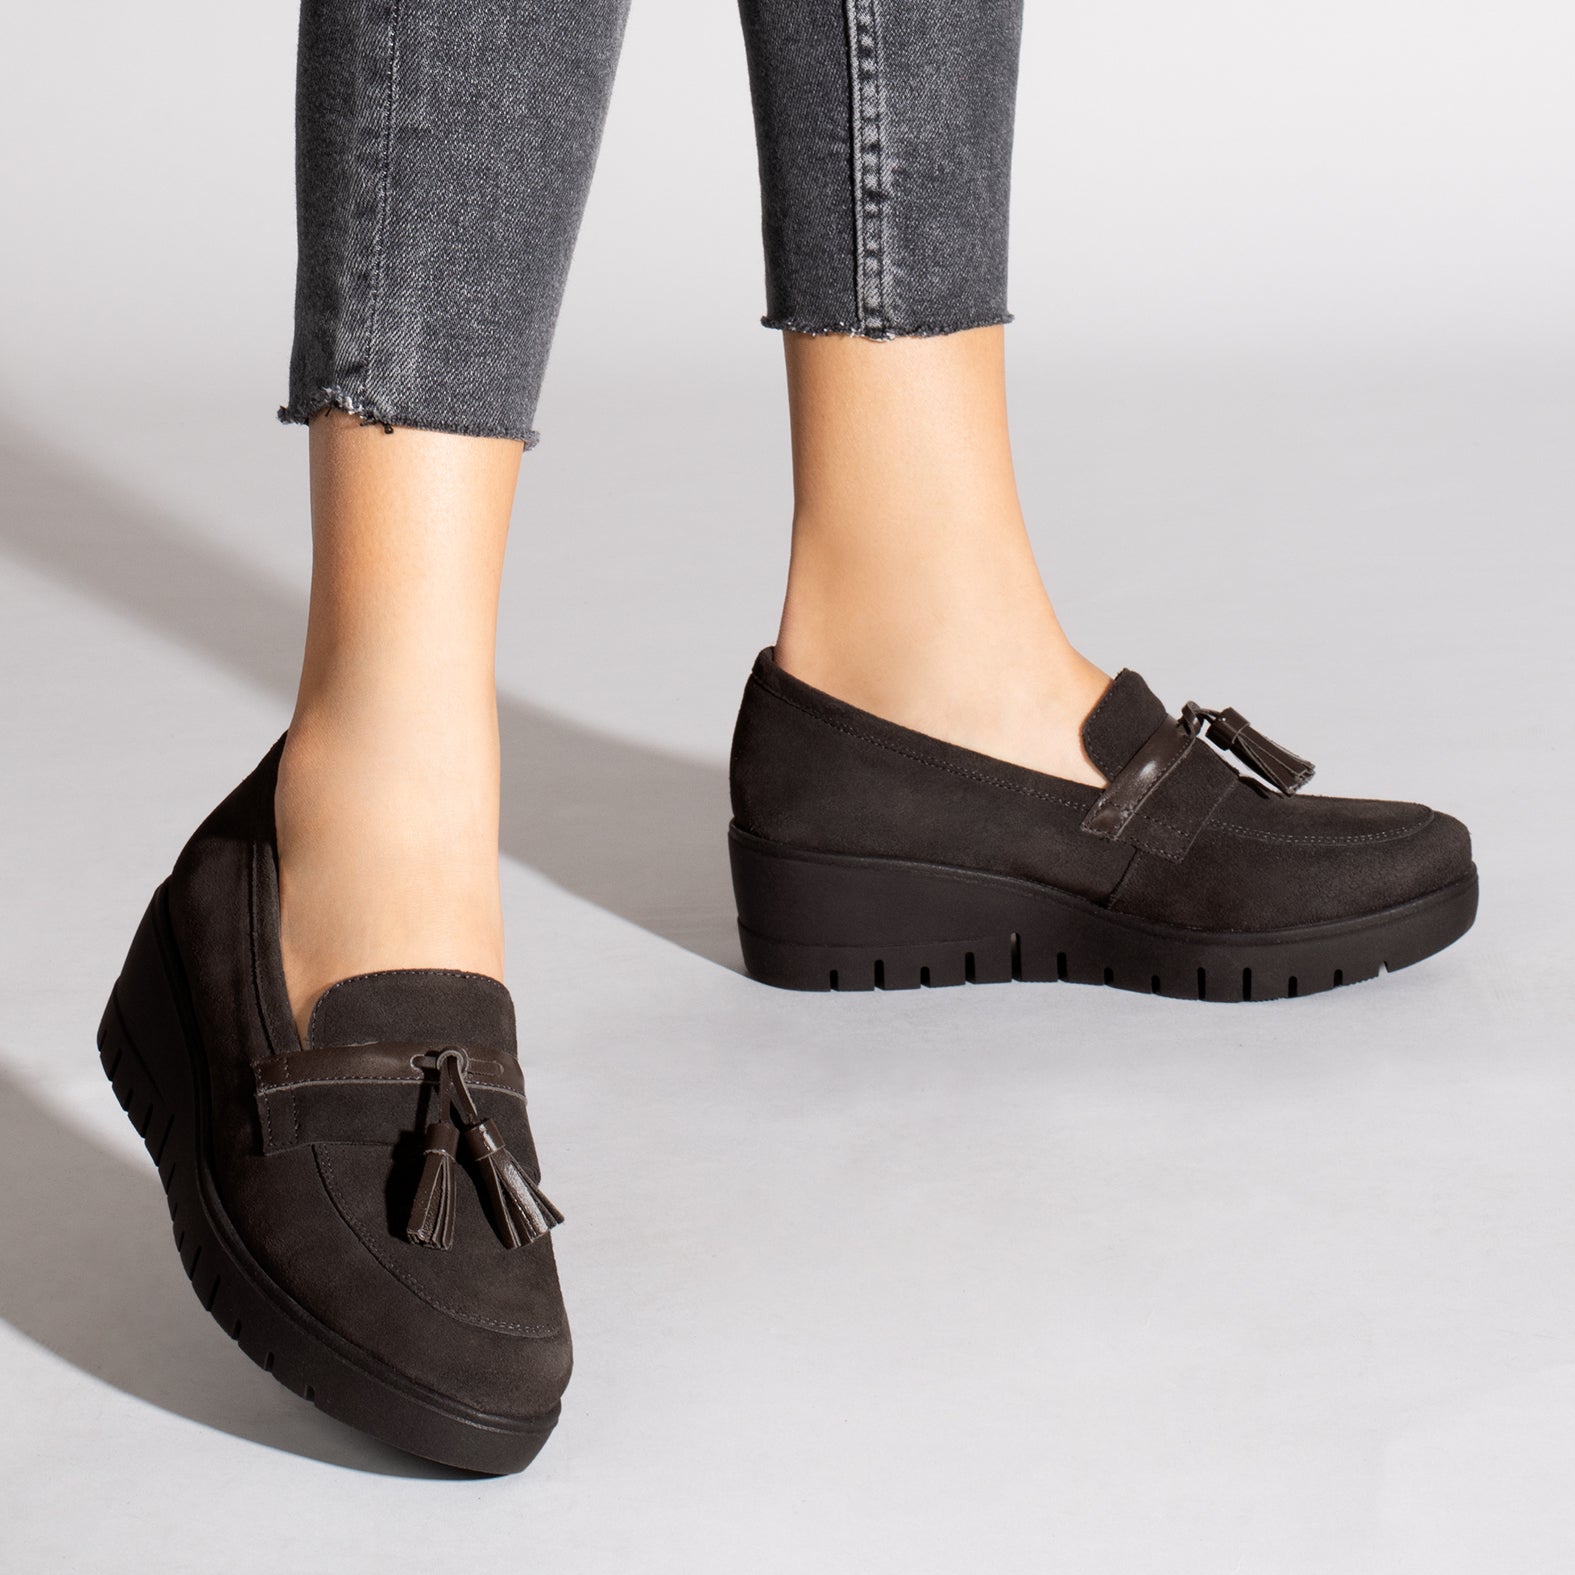 TASSEL - GREY moccasin with wedge and platform